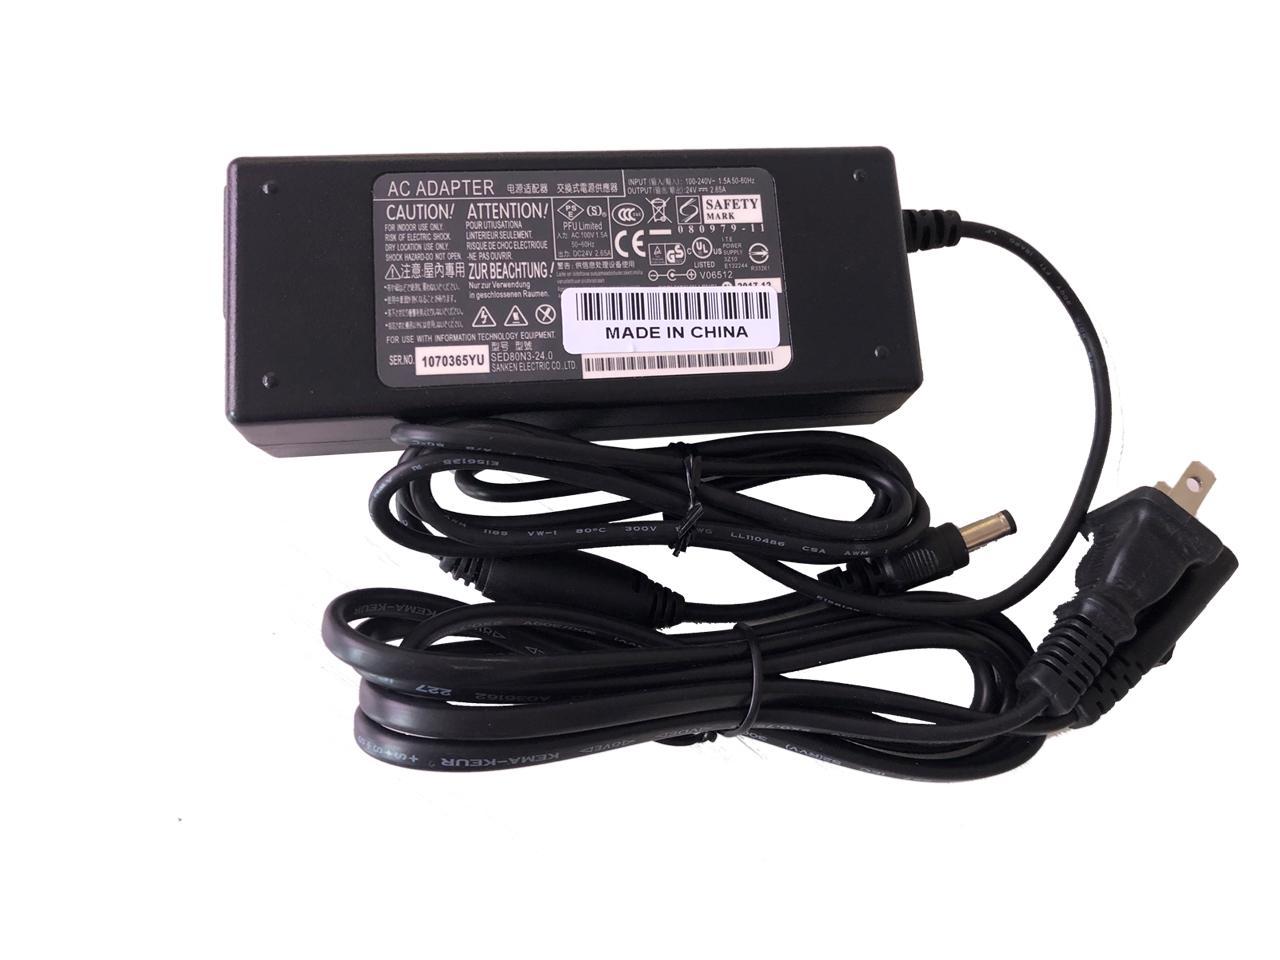 24V DC AC Adapter For Fujitsu fi-5120C S1500 S1500M Scanners Power Supply Cord